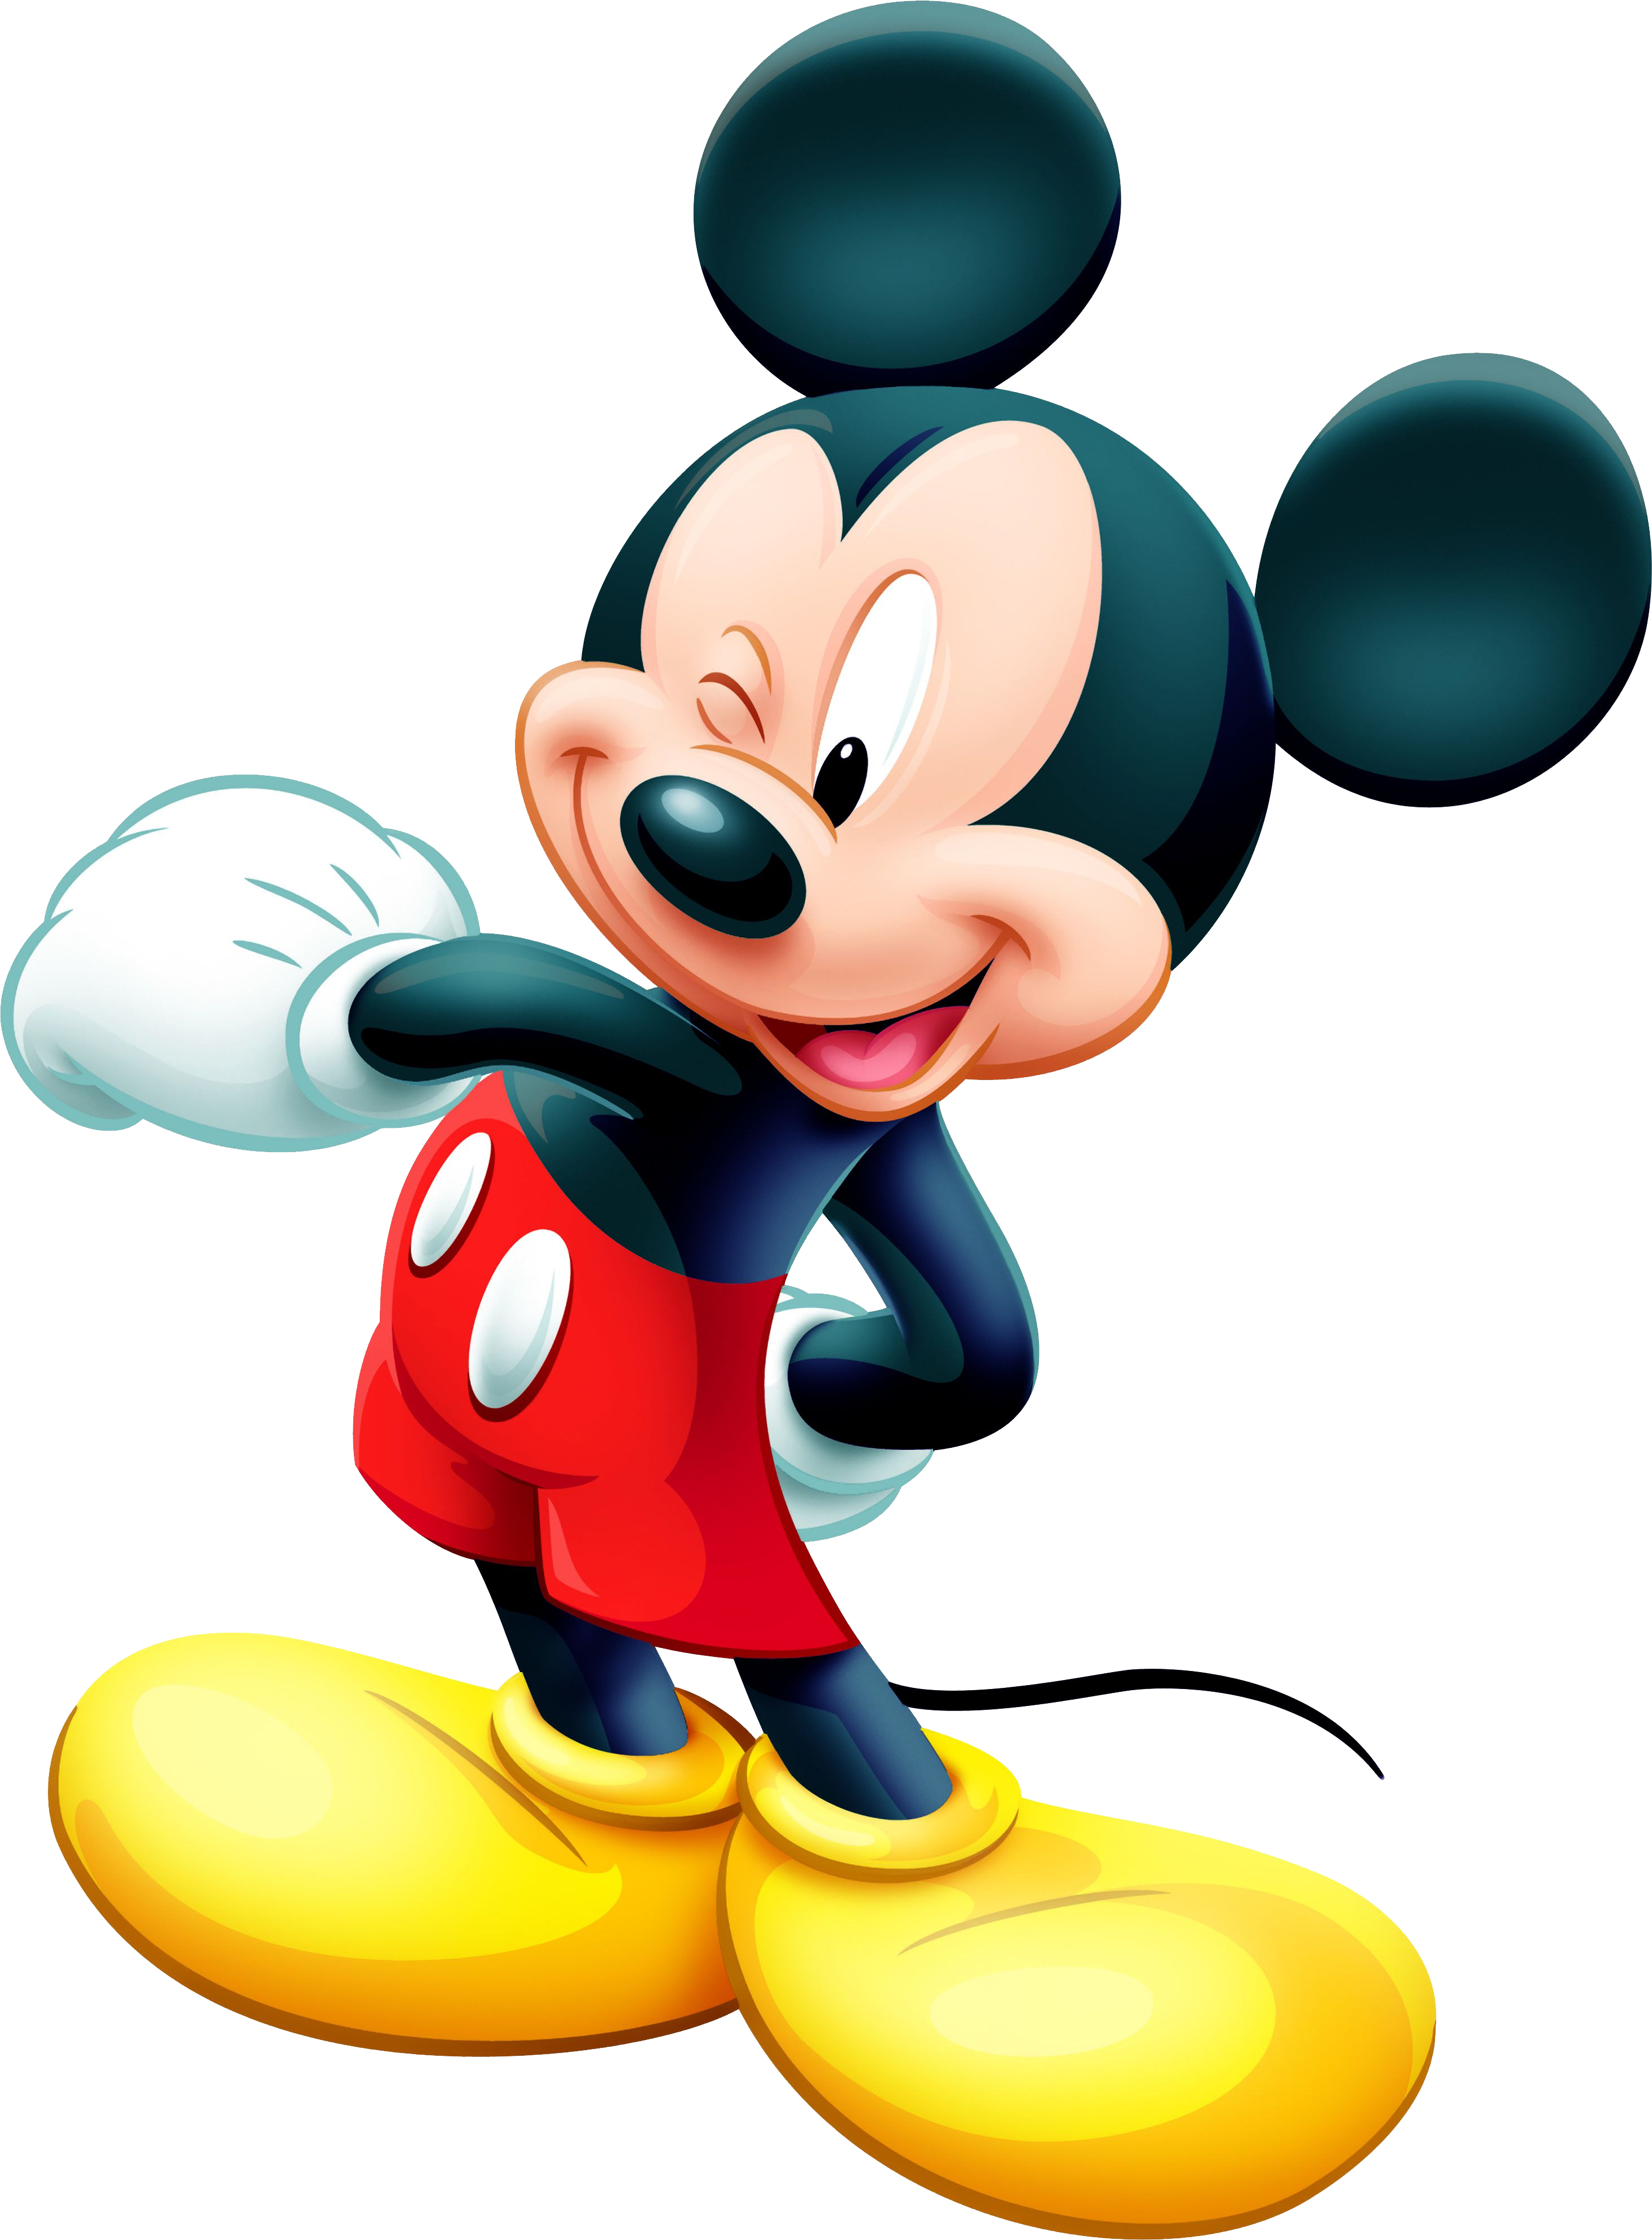 Mickey Mouse Ears Png 2932 X 3976